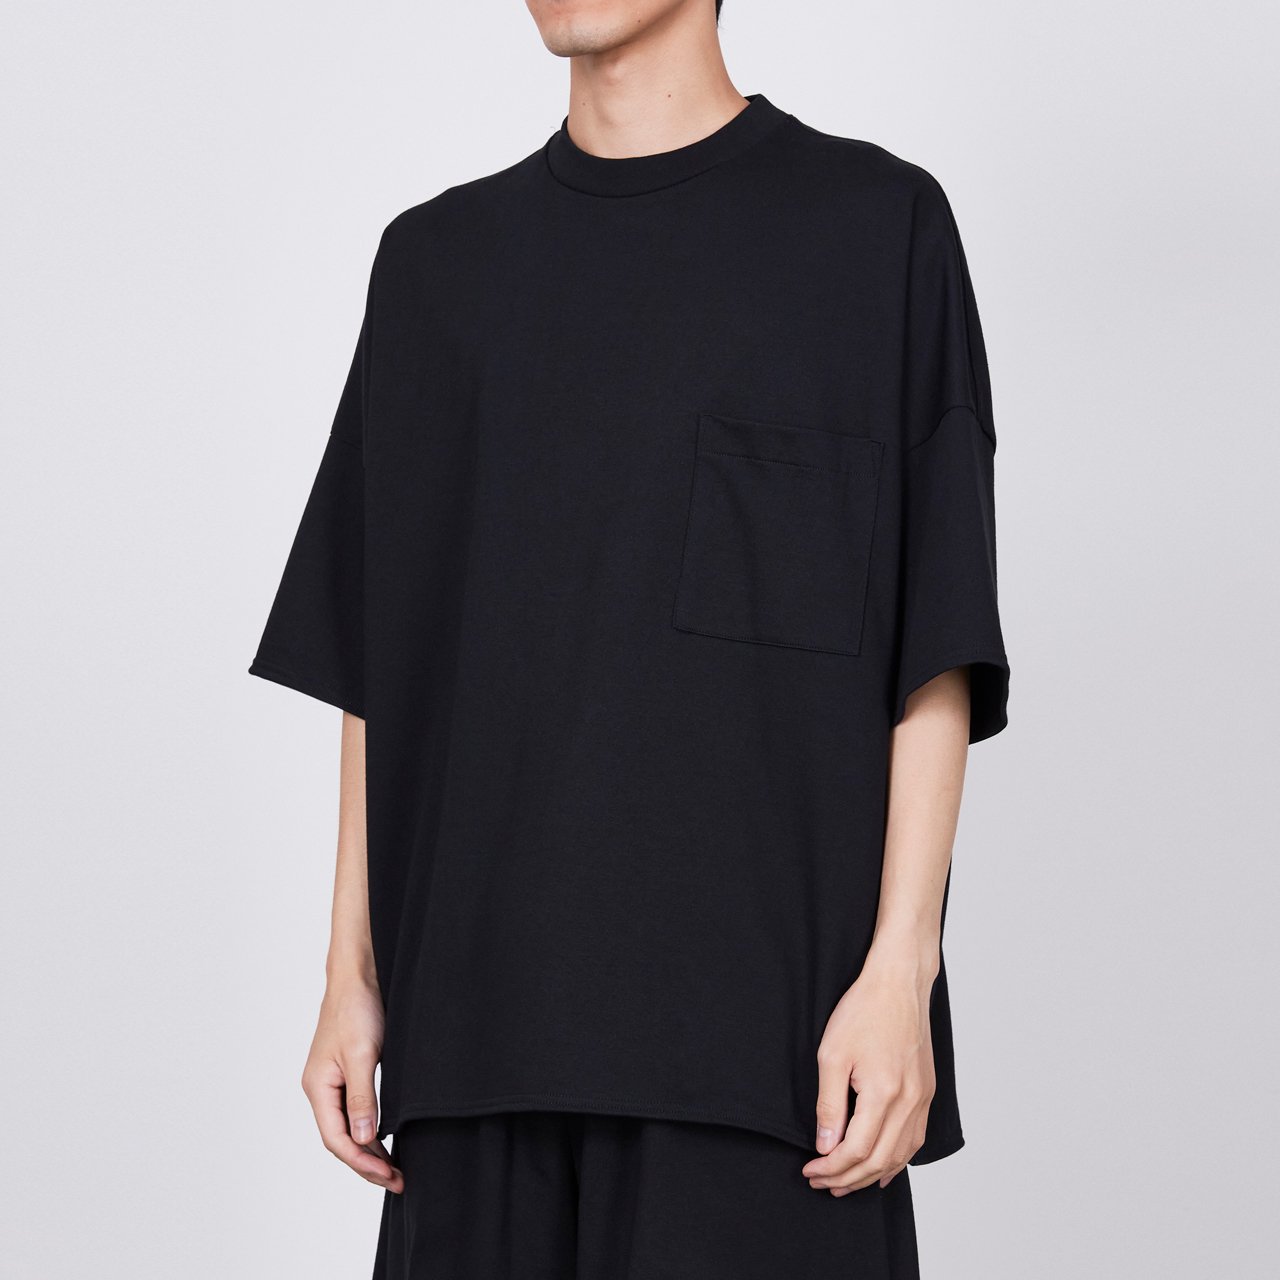 <img class='new_mark_img1' src='https://img.shop-pro.jp/img/new/icons5.gif' style='border:none;display:inline;margin:0px;padding:0px;width:auto;' />marka (ޡ)POCKET TEE BLACK -20//1 RECYCLE SUVIN ORGANIAC COTTON KNIT-